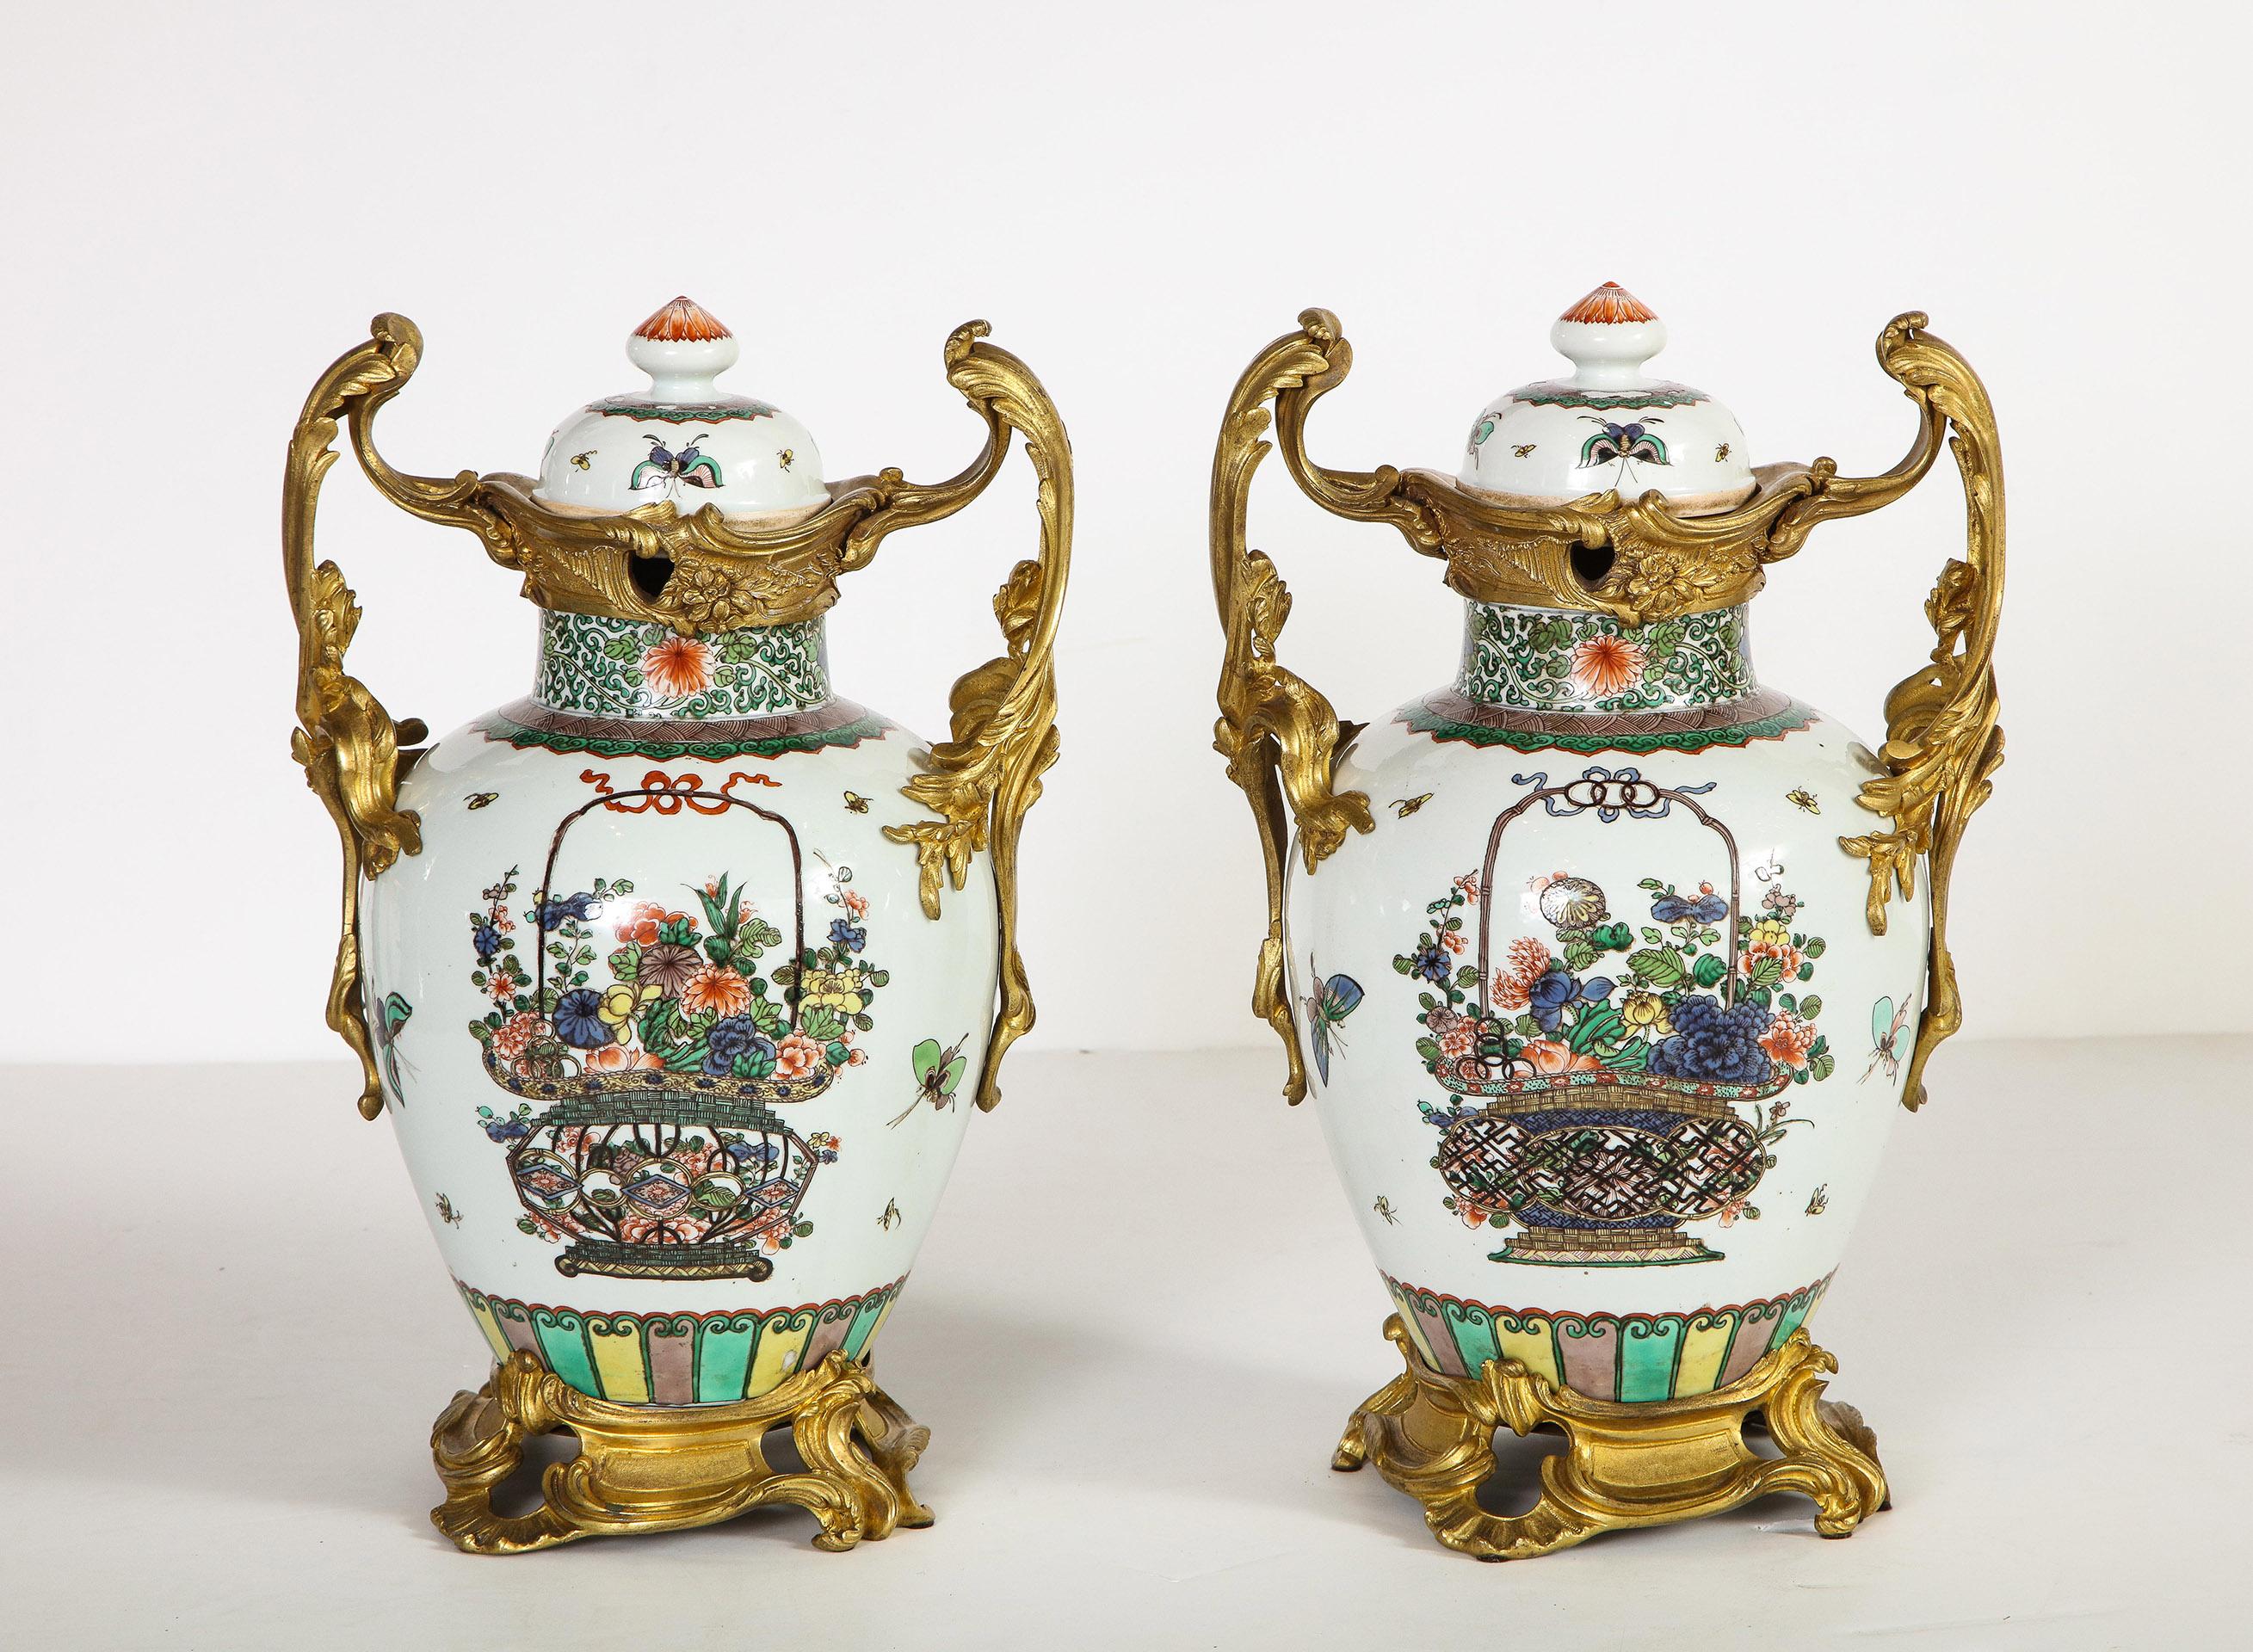 Pair of Louis XVI style Chinese porcelain urns with ormolu mounts

The pair of 19th century Chinese porcelain lidded urns with French Louis XVI style ormolu mounts. Each urn with raised scrolled circular ormolu base. Above the urn with floral